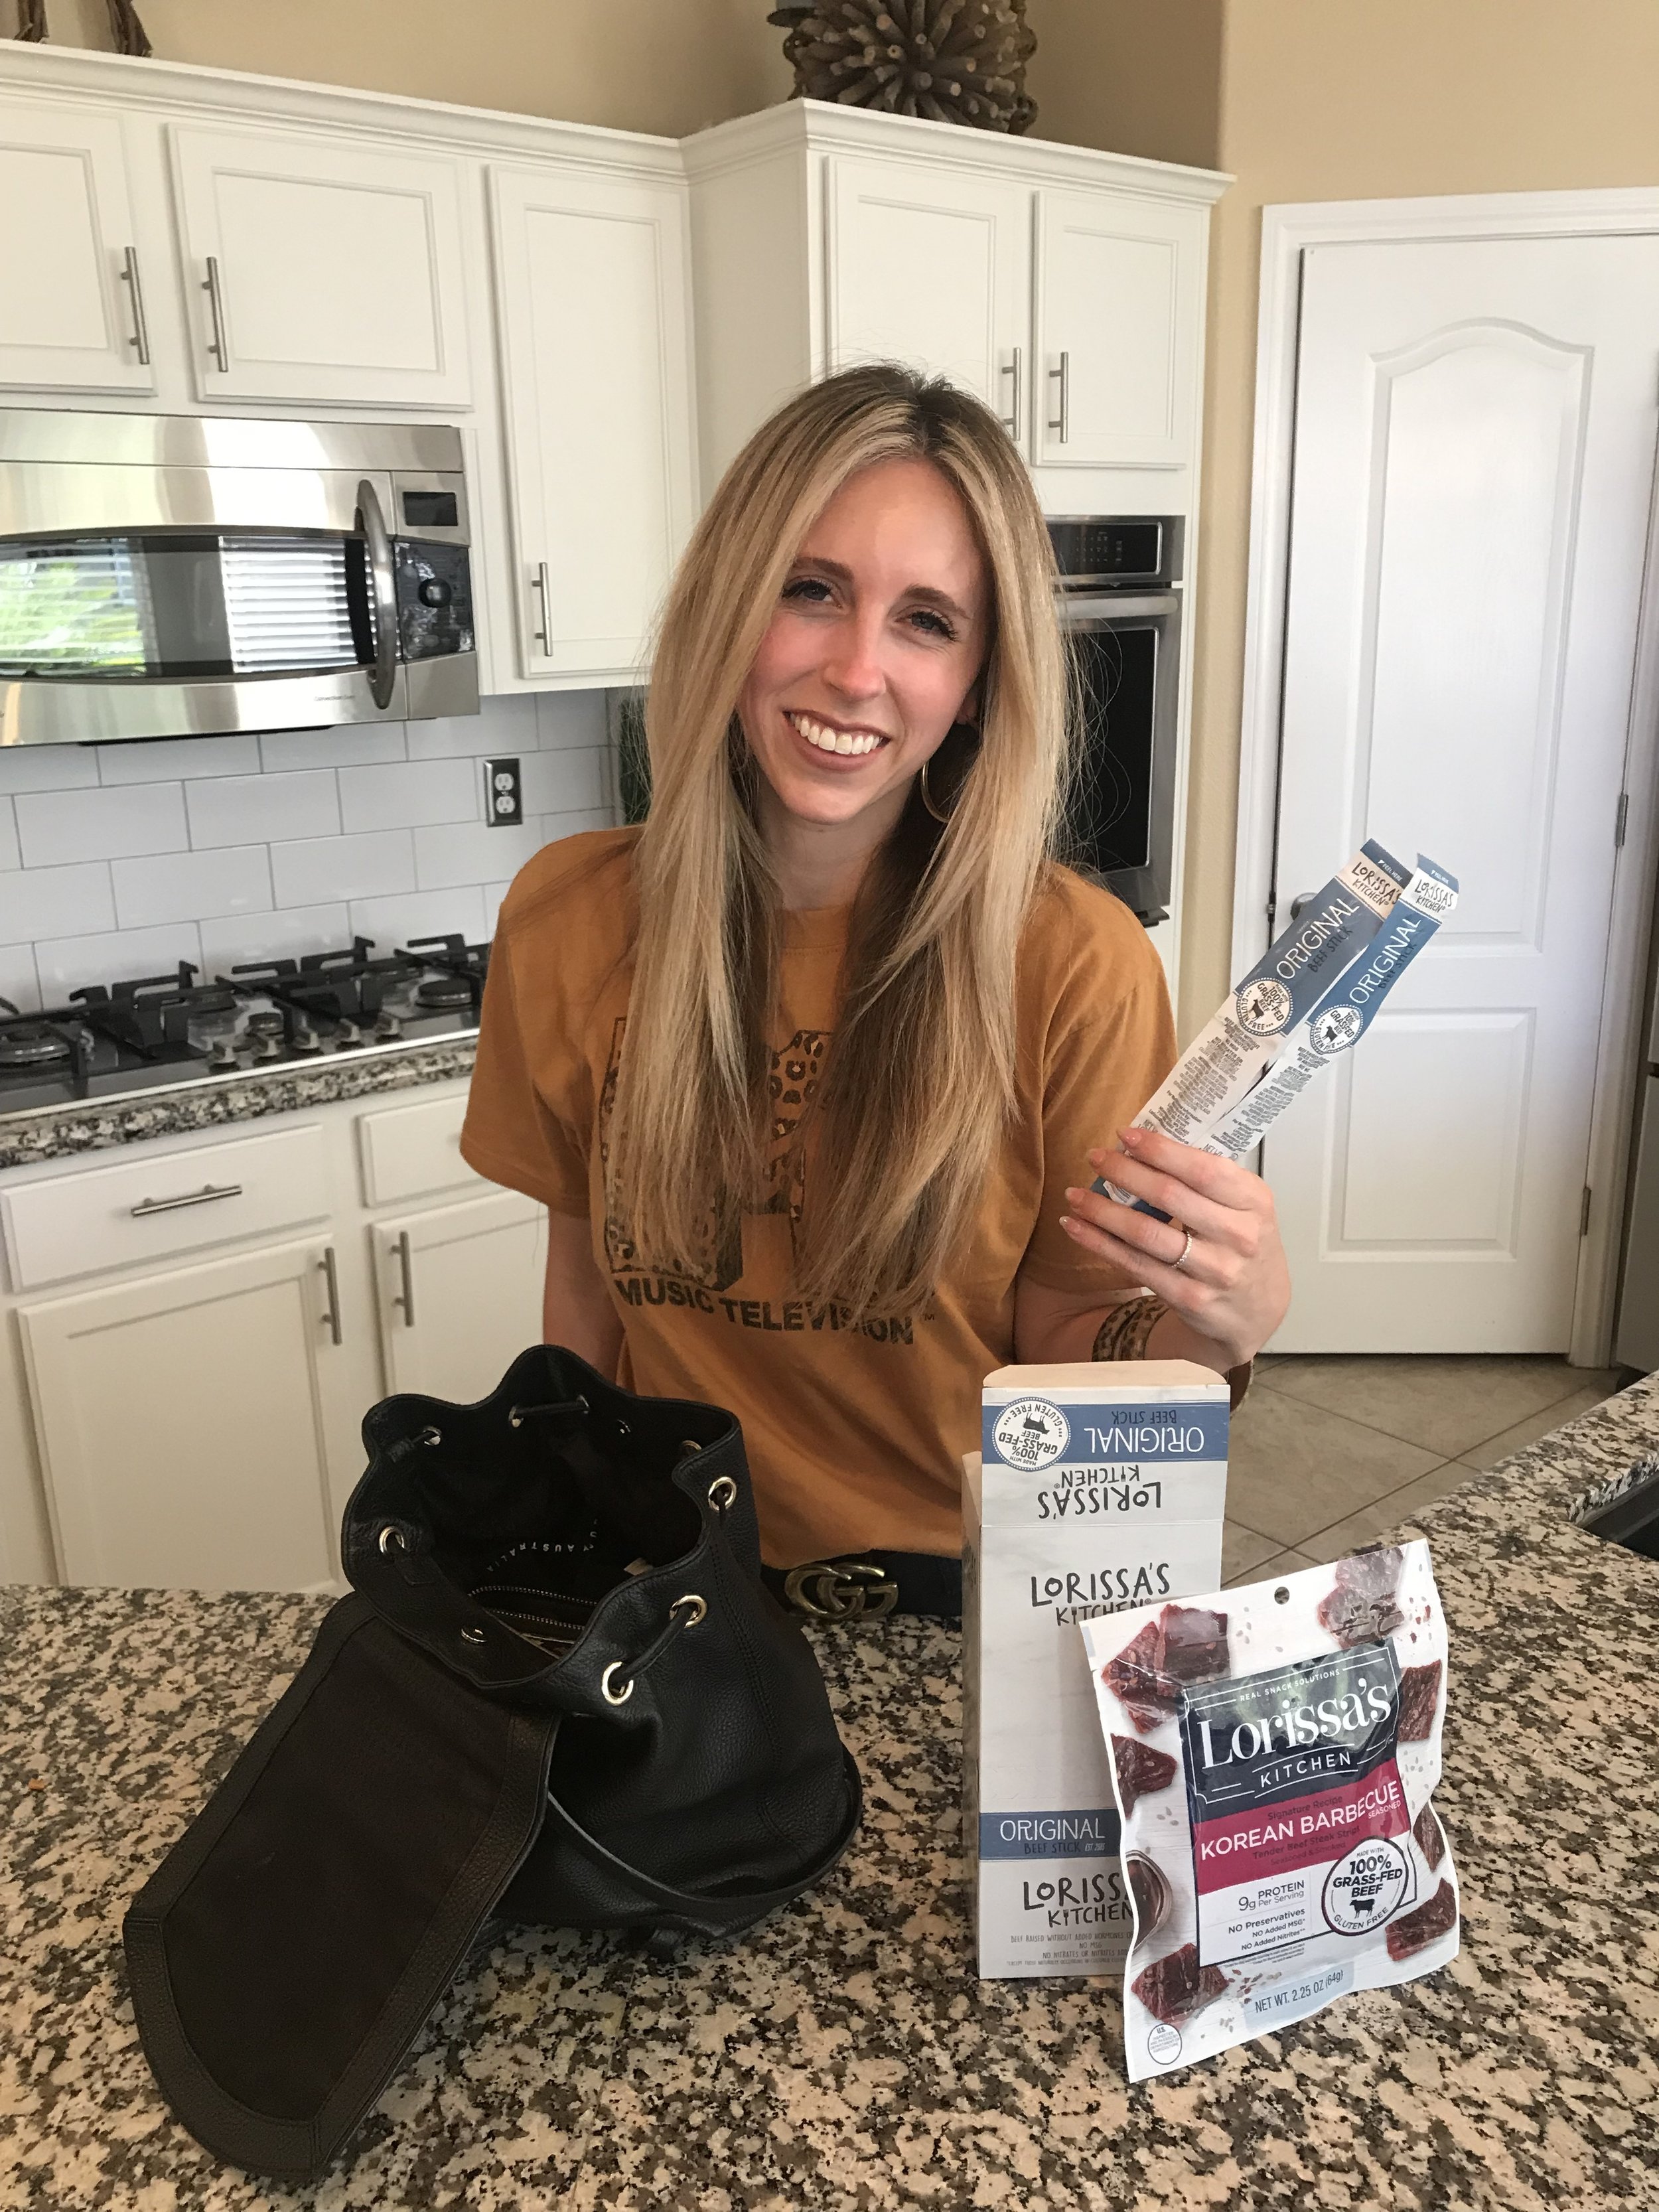 Lorissa's Kitchen review featured by top US life and style blog, Life of a Sister